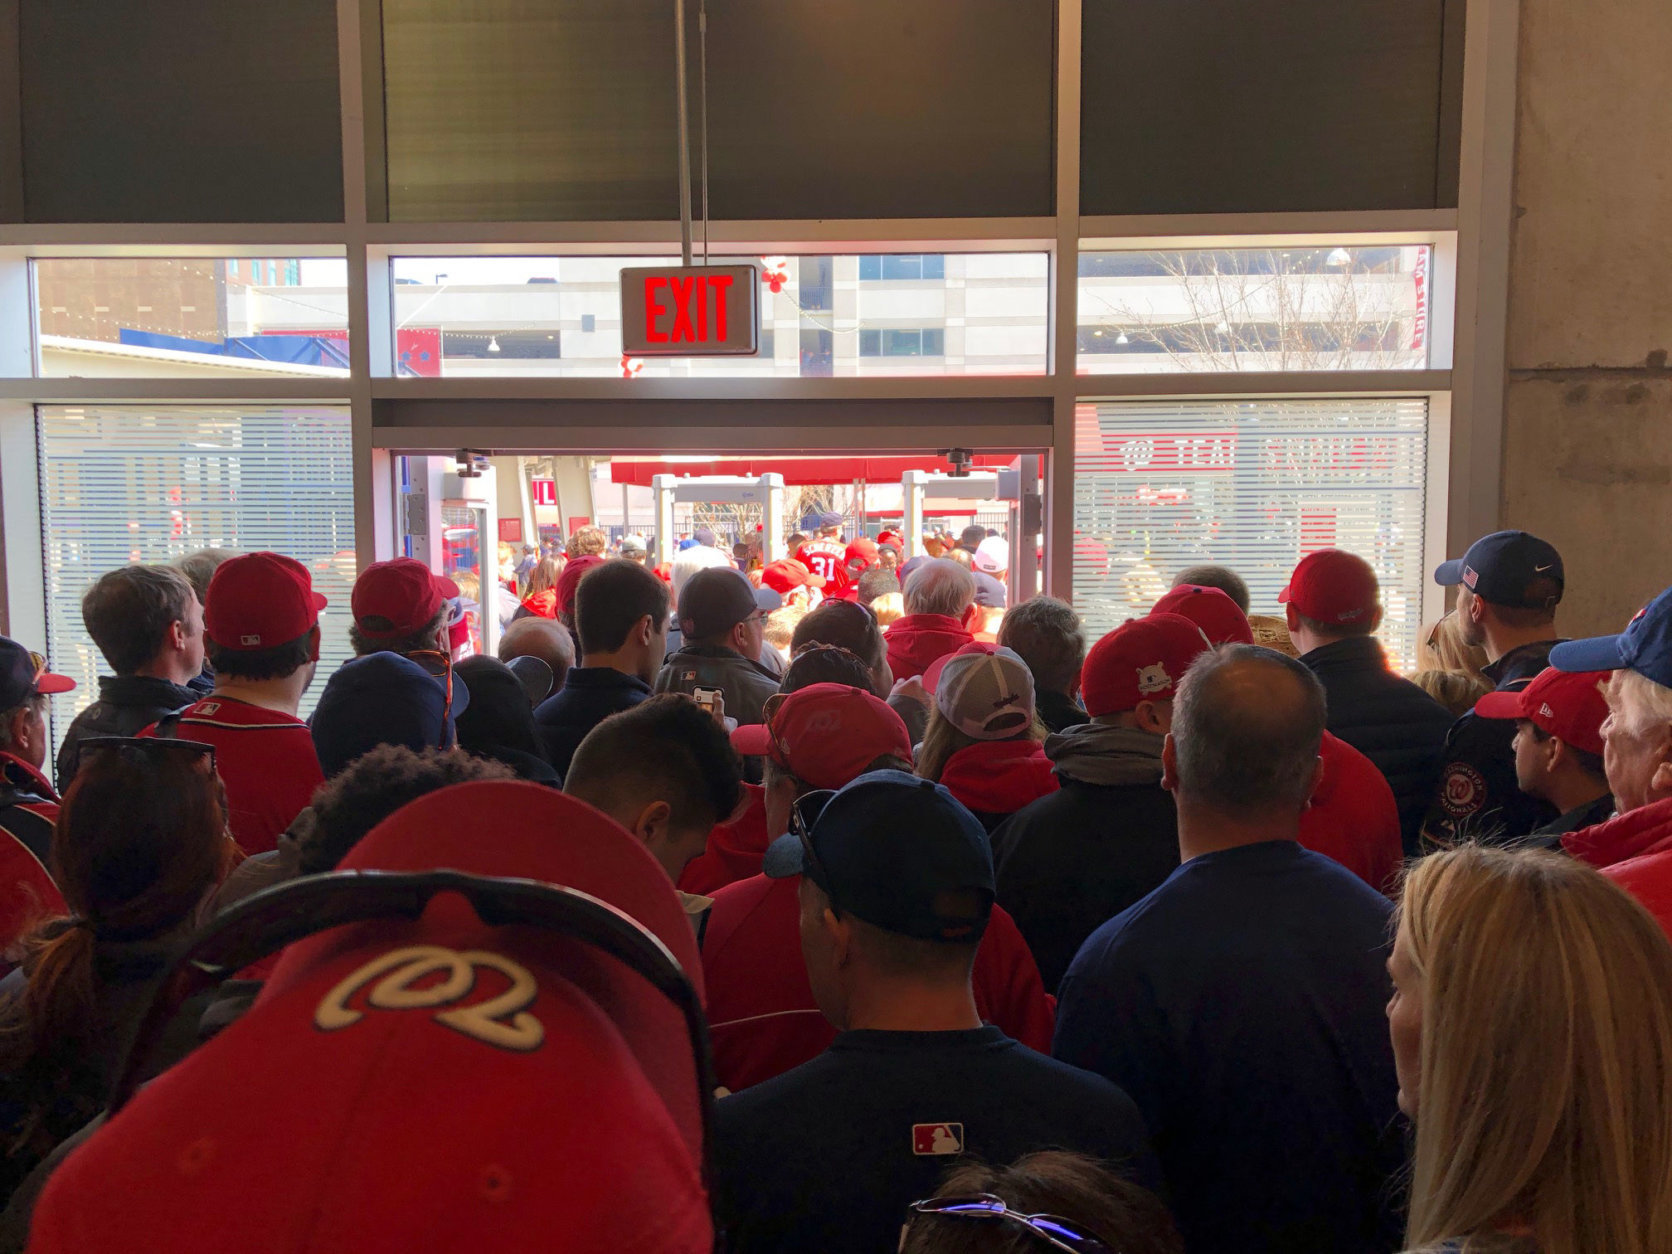 Crowds for opening day at Nationals Park are massive Thursday. (WTOP/Julia Ziegler)